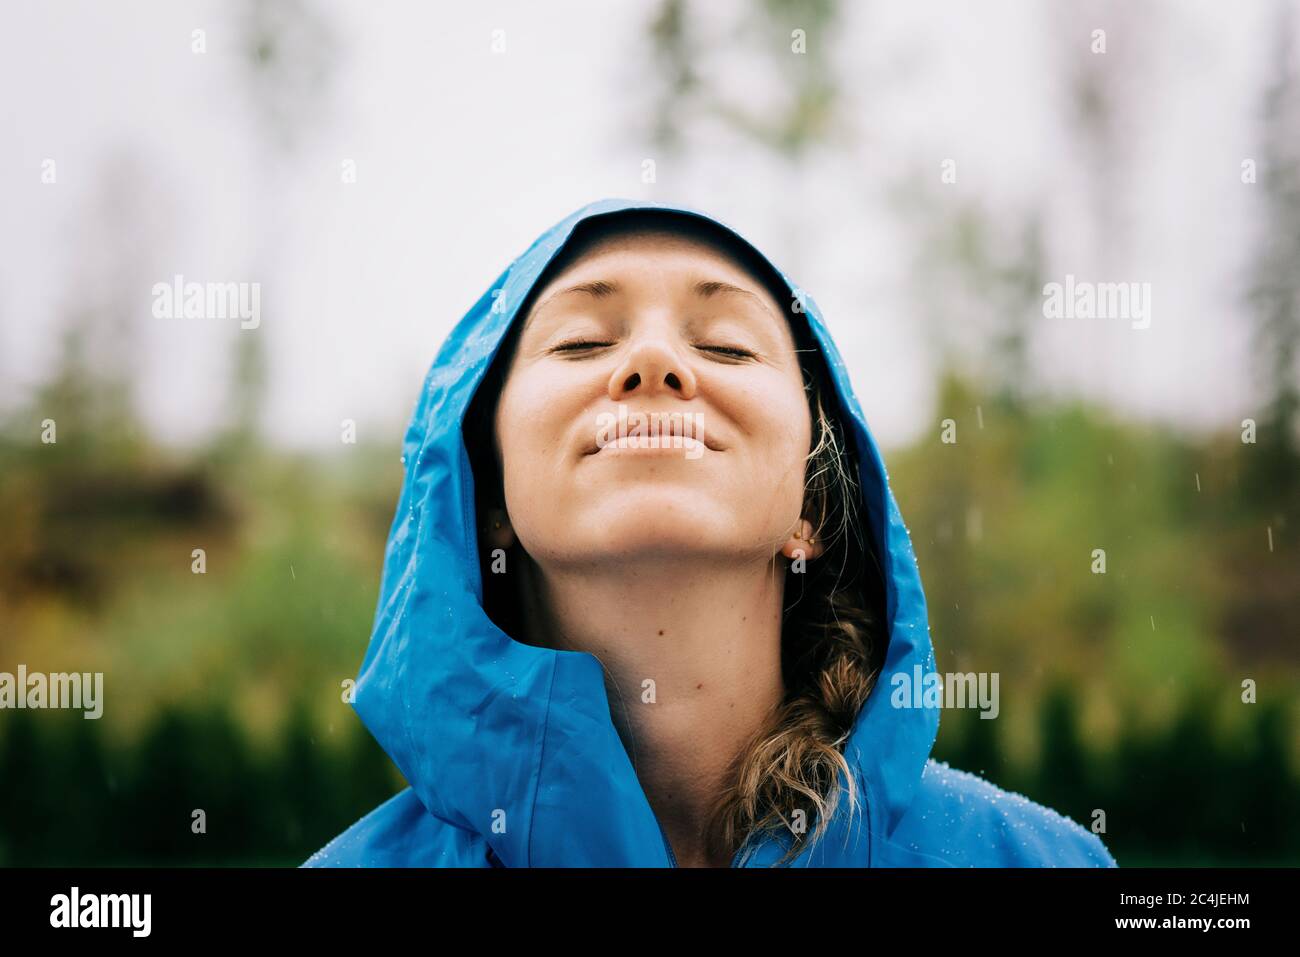 woman stood in the rain smiling with rain drops on her face Stock Photo